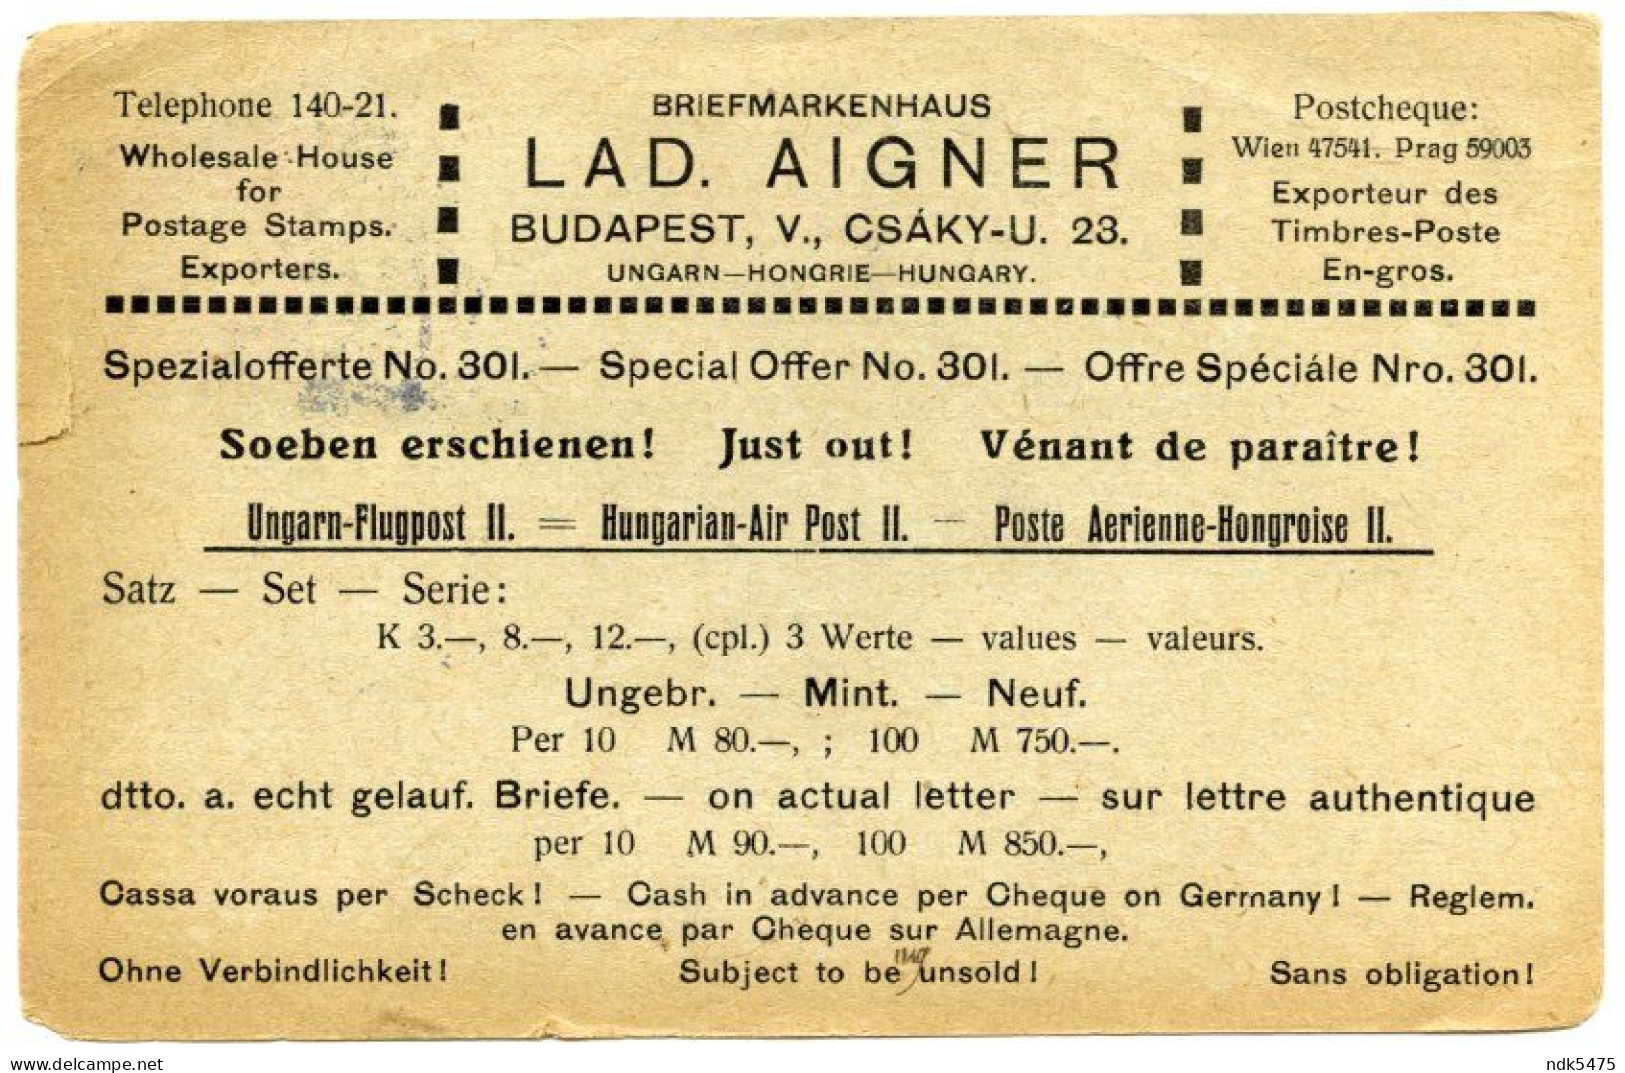 HUNGARY : AIGNER - STAMPS, TIMBRES - BUDAPEST, CSAKY-U. / AIR POST, 1920 / CONSETT, STANLEY, ELMFIELD RD. (CHARANCE) - Interi Postali